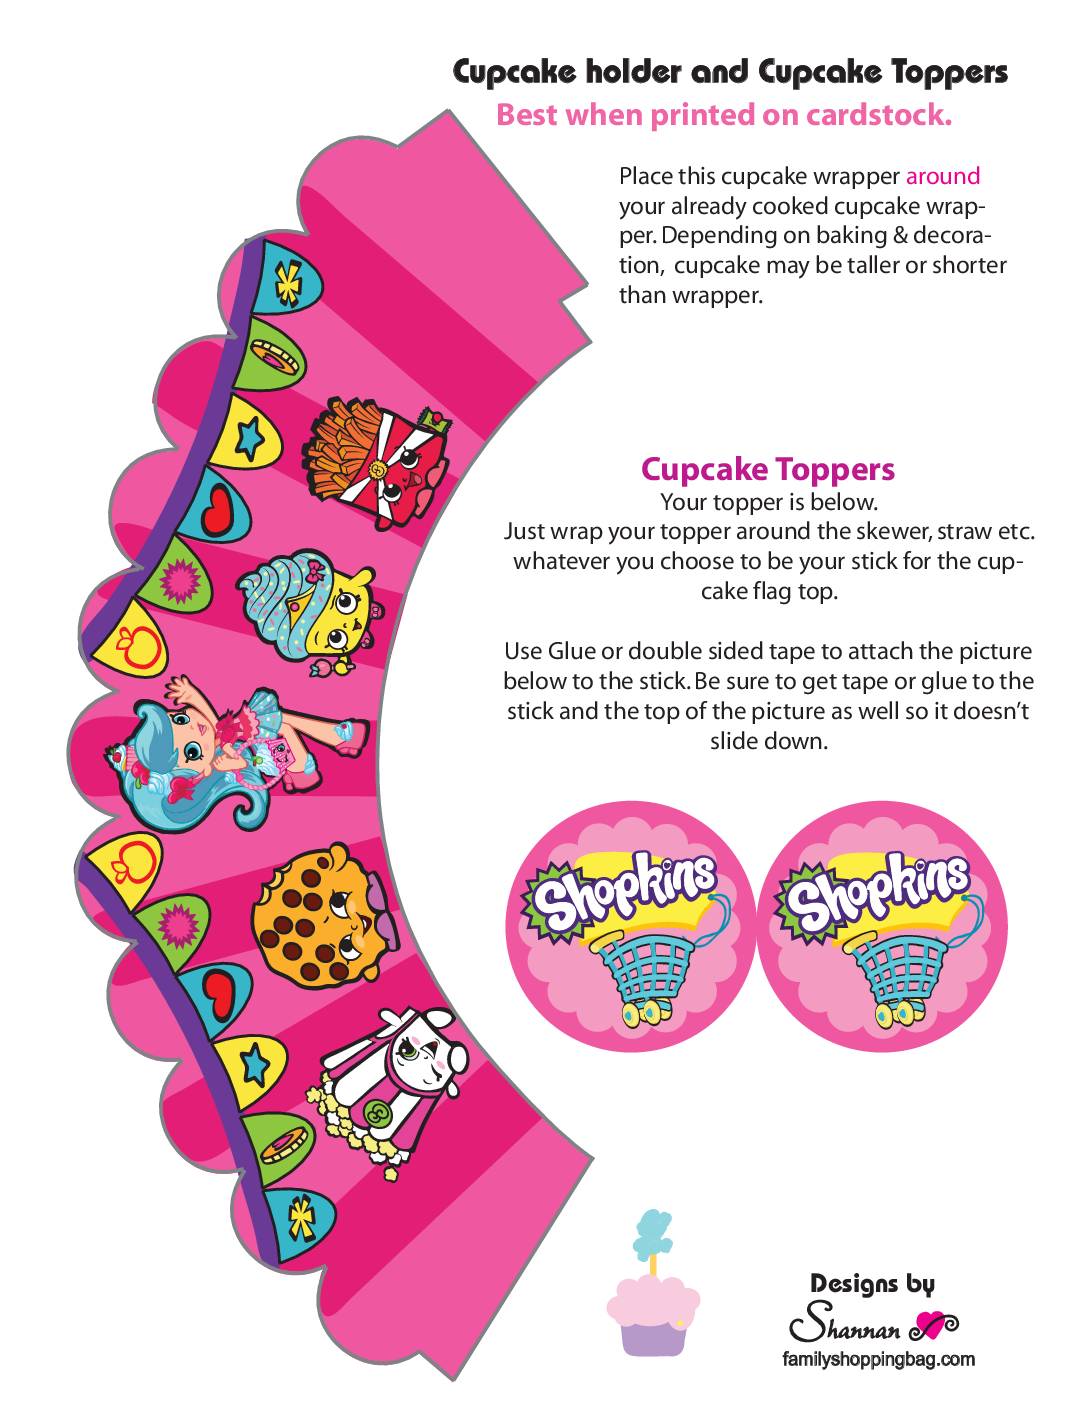 Shopkkins Cupcakes Cupcake Wrappers